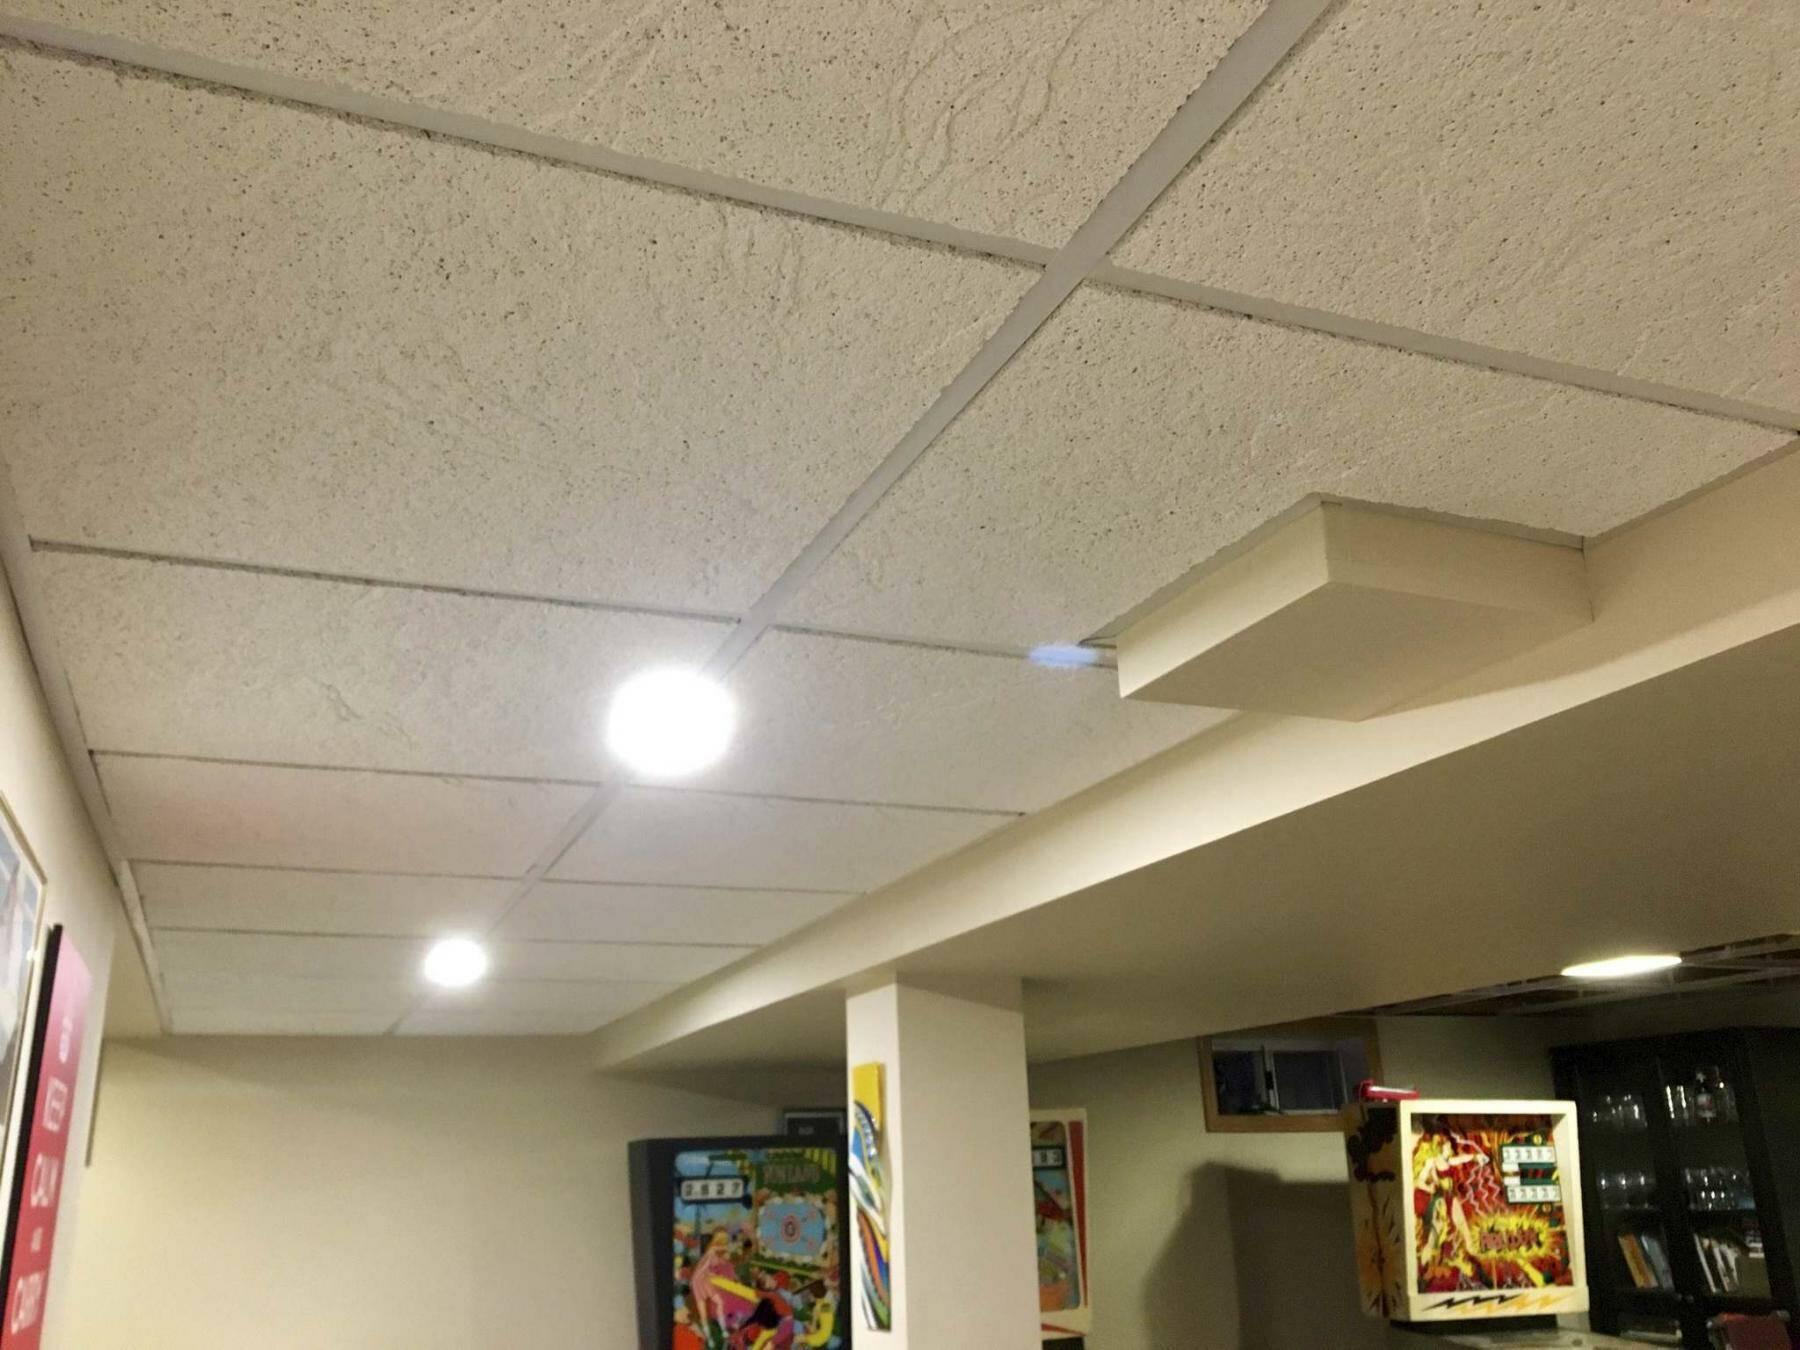  <p>Marc LaBossiere / Winnipeg Free Press files</p>
                                <p>The main benefit of the drop ceiling is the ease of access behind it, after completion.</p> 